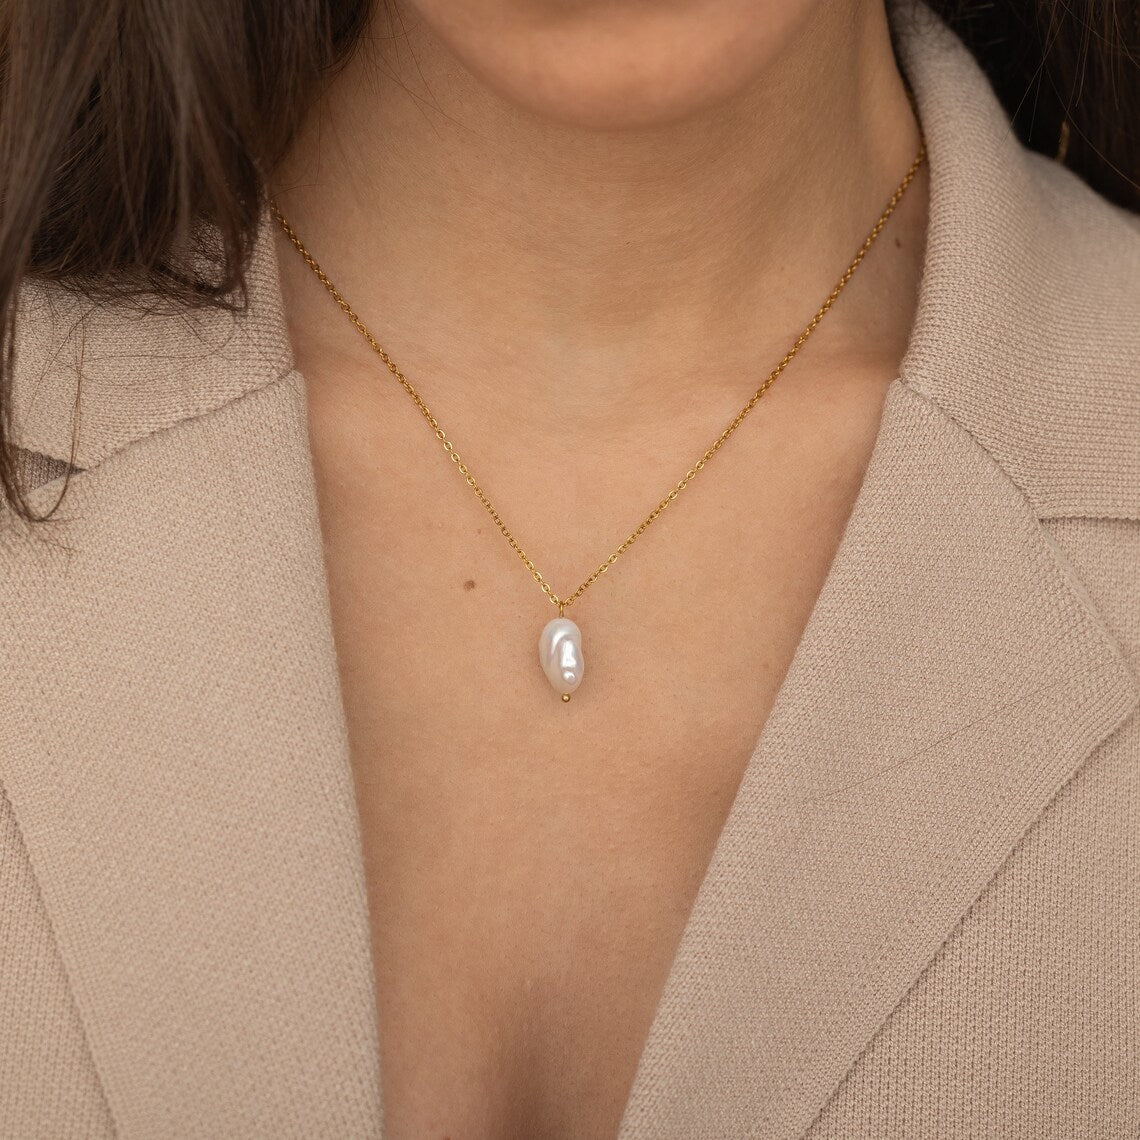 Long Baroque Pearl Chain Necklace